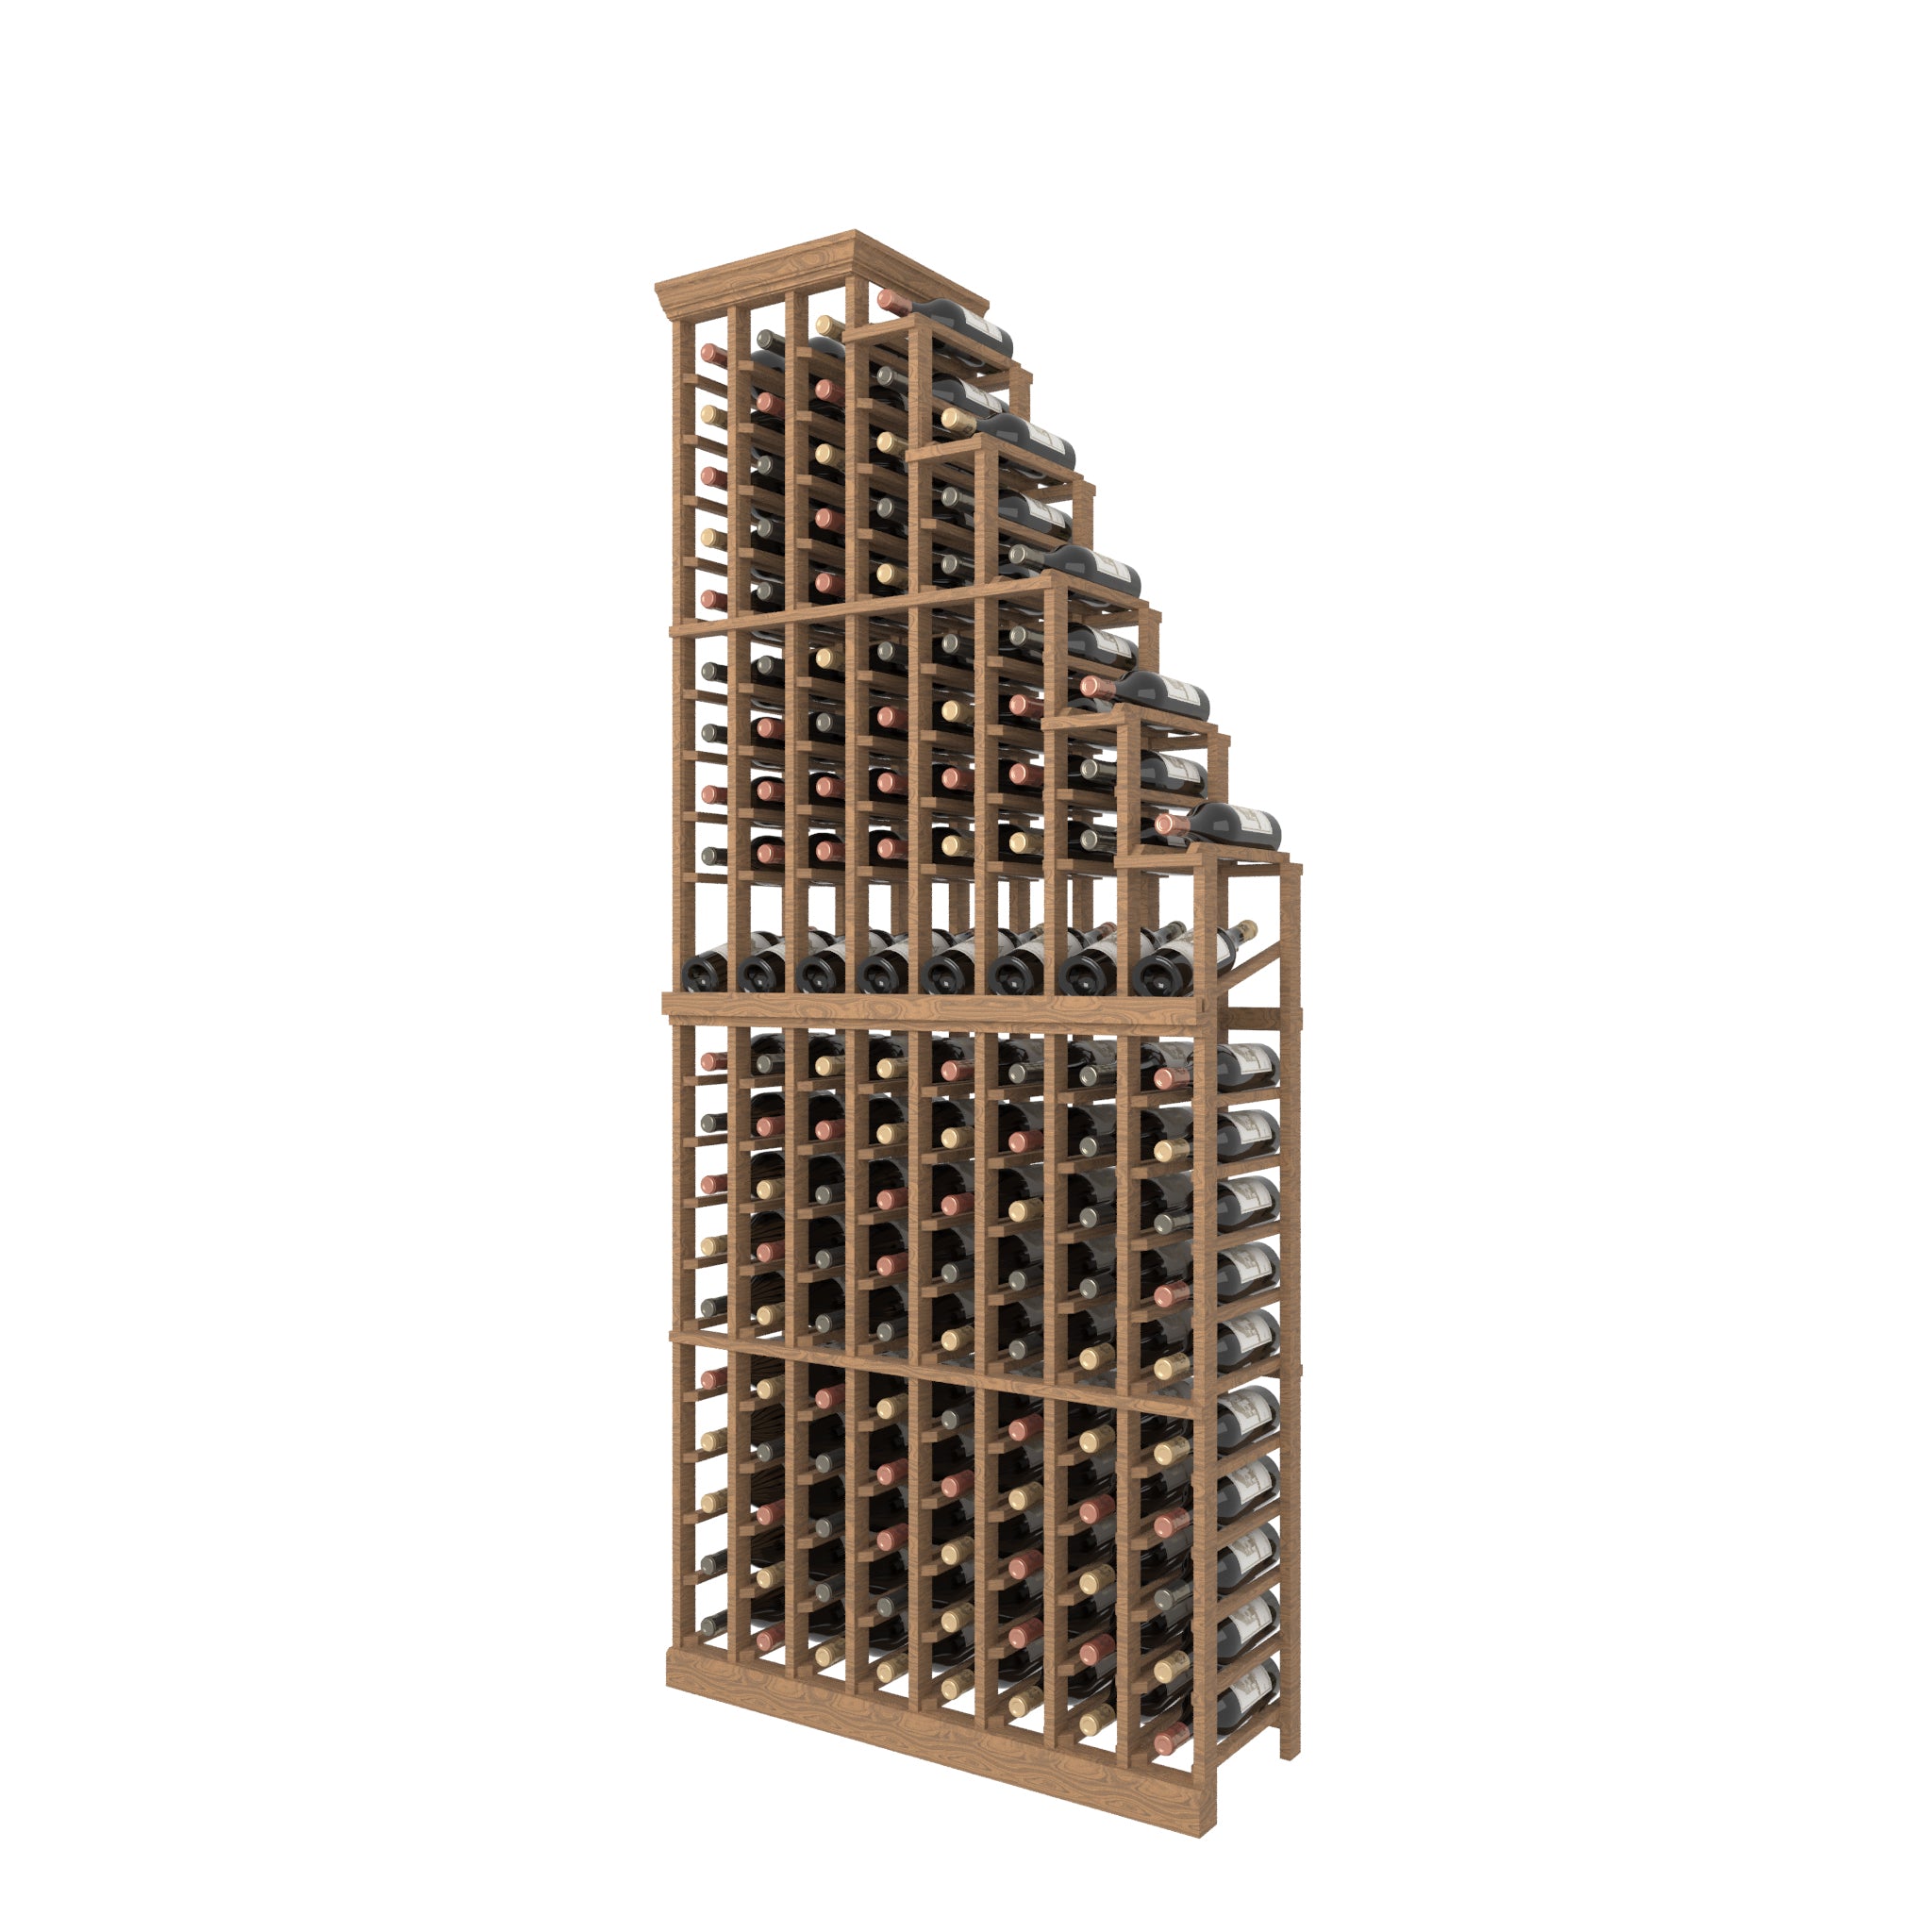 8 Column Individual Bottle Cascade Wood Rack Right with Display Row